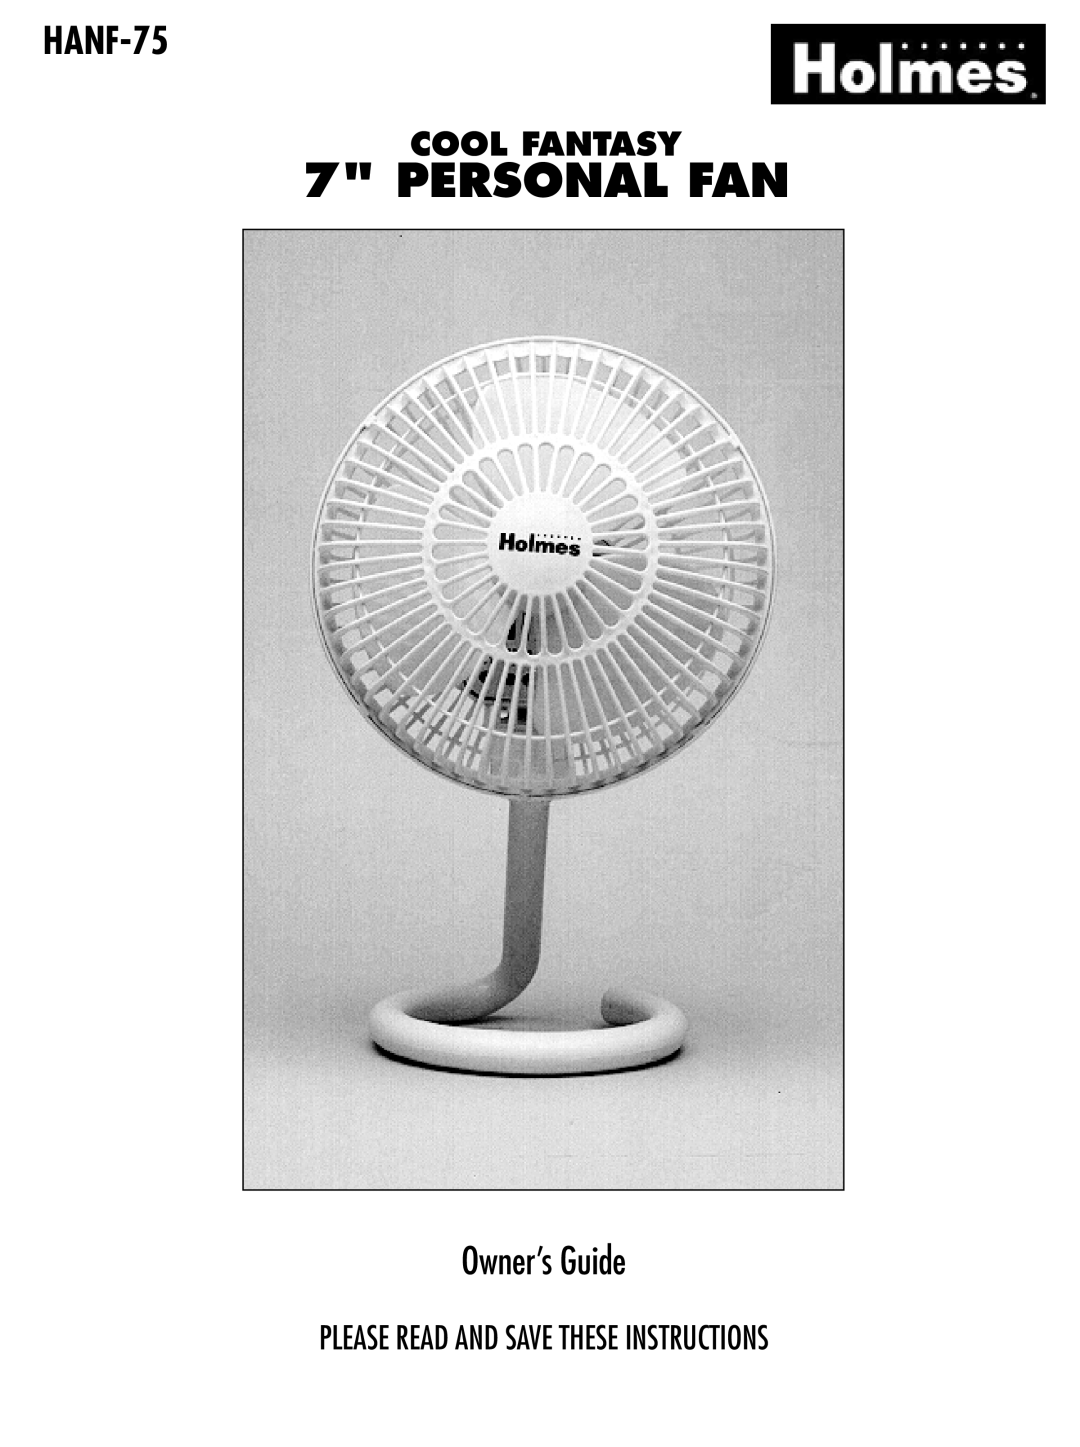 Holmes HANF-75 manual Personal Fan, Owner’s Guide, Cool Fantasy, Please Read And Save These Instructions 